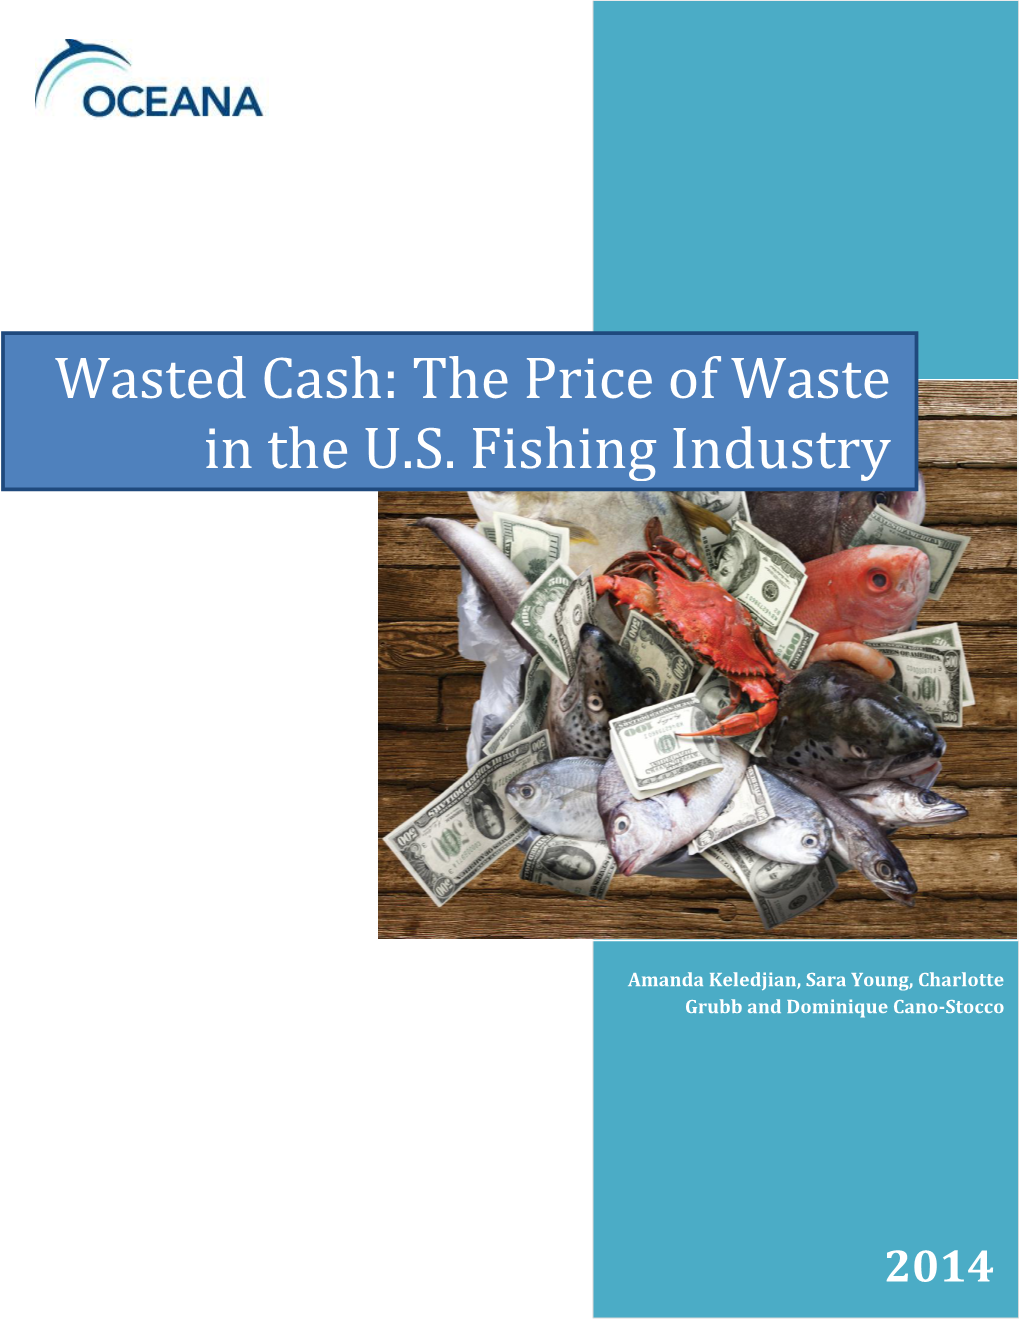 Wasted Cash: the Price of Waste in the U.S. Fishing Industry